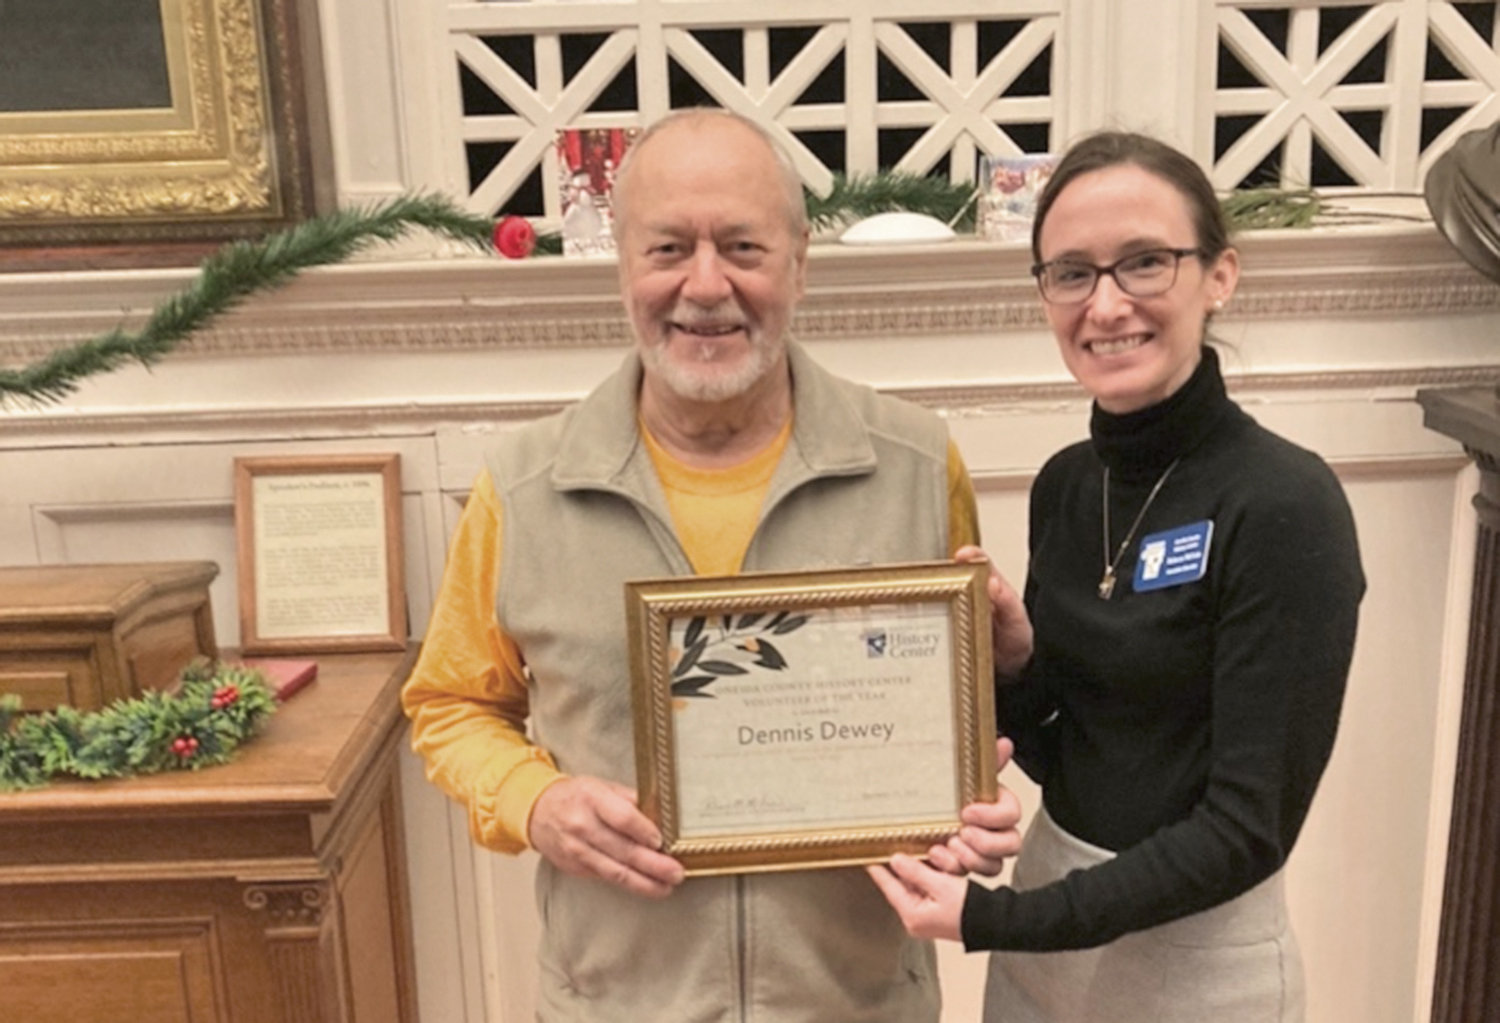 Oneida County History Center volunteer Dennis Dewey poses with Executive Director Rebecca McLain and the 2022 Volunteer of the Year award he received from the Utica history center.